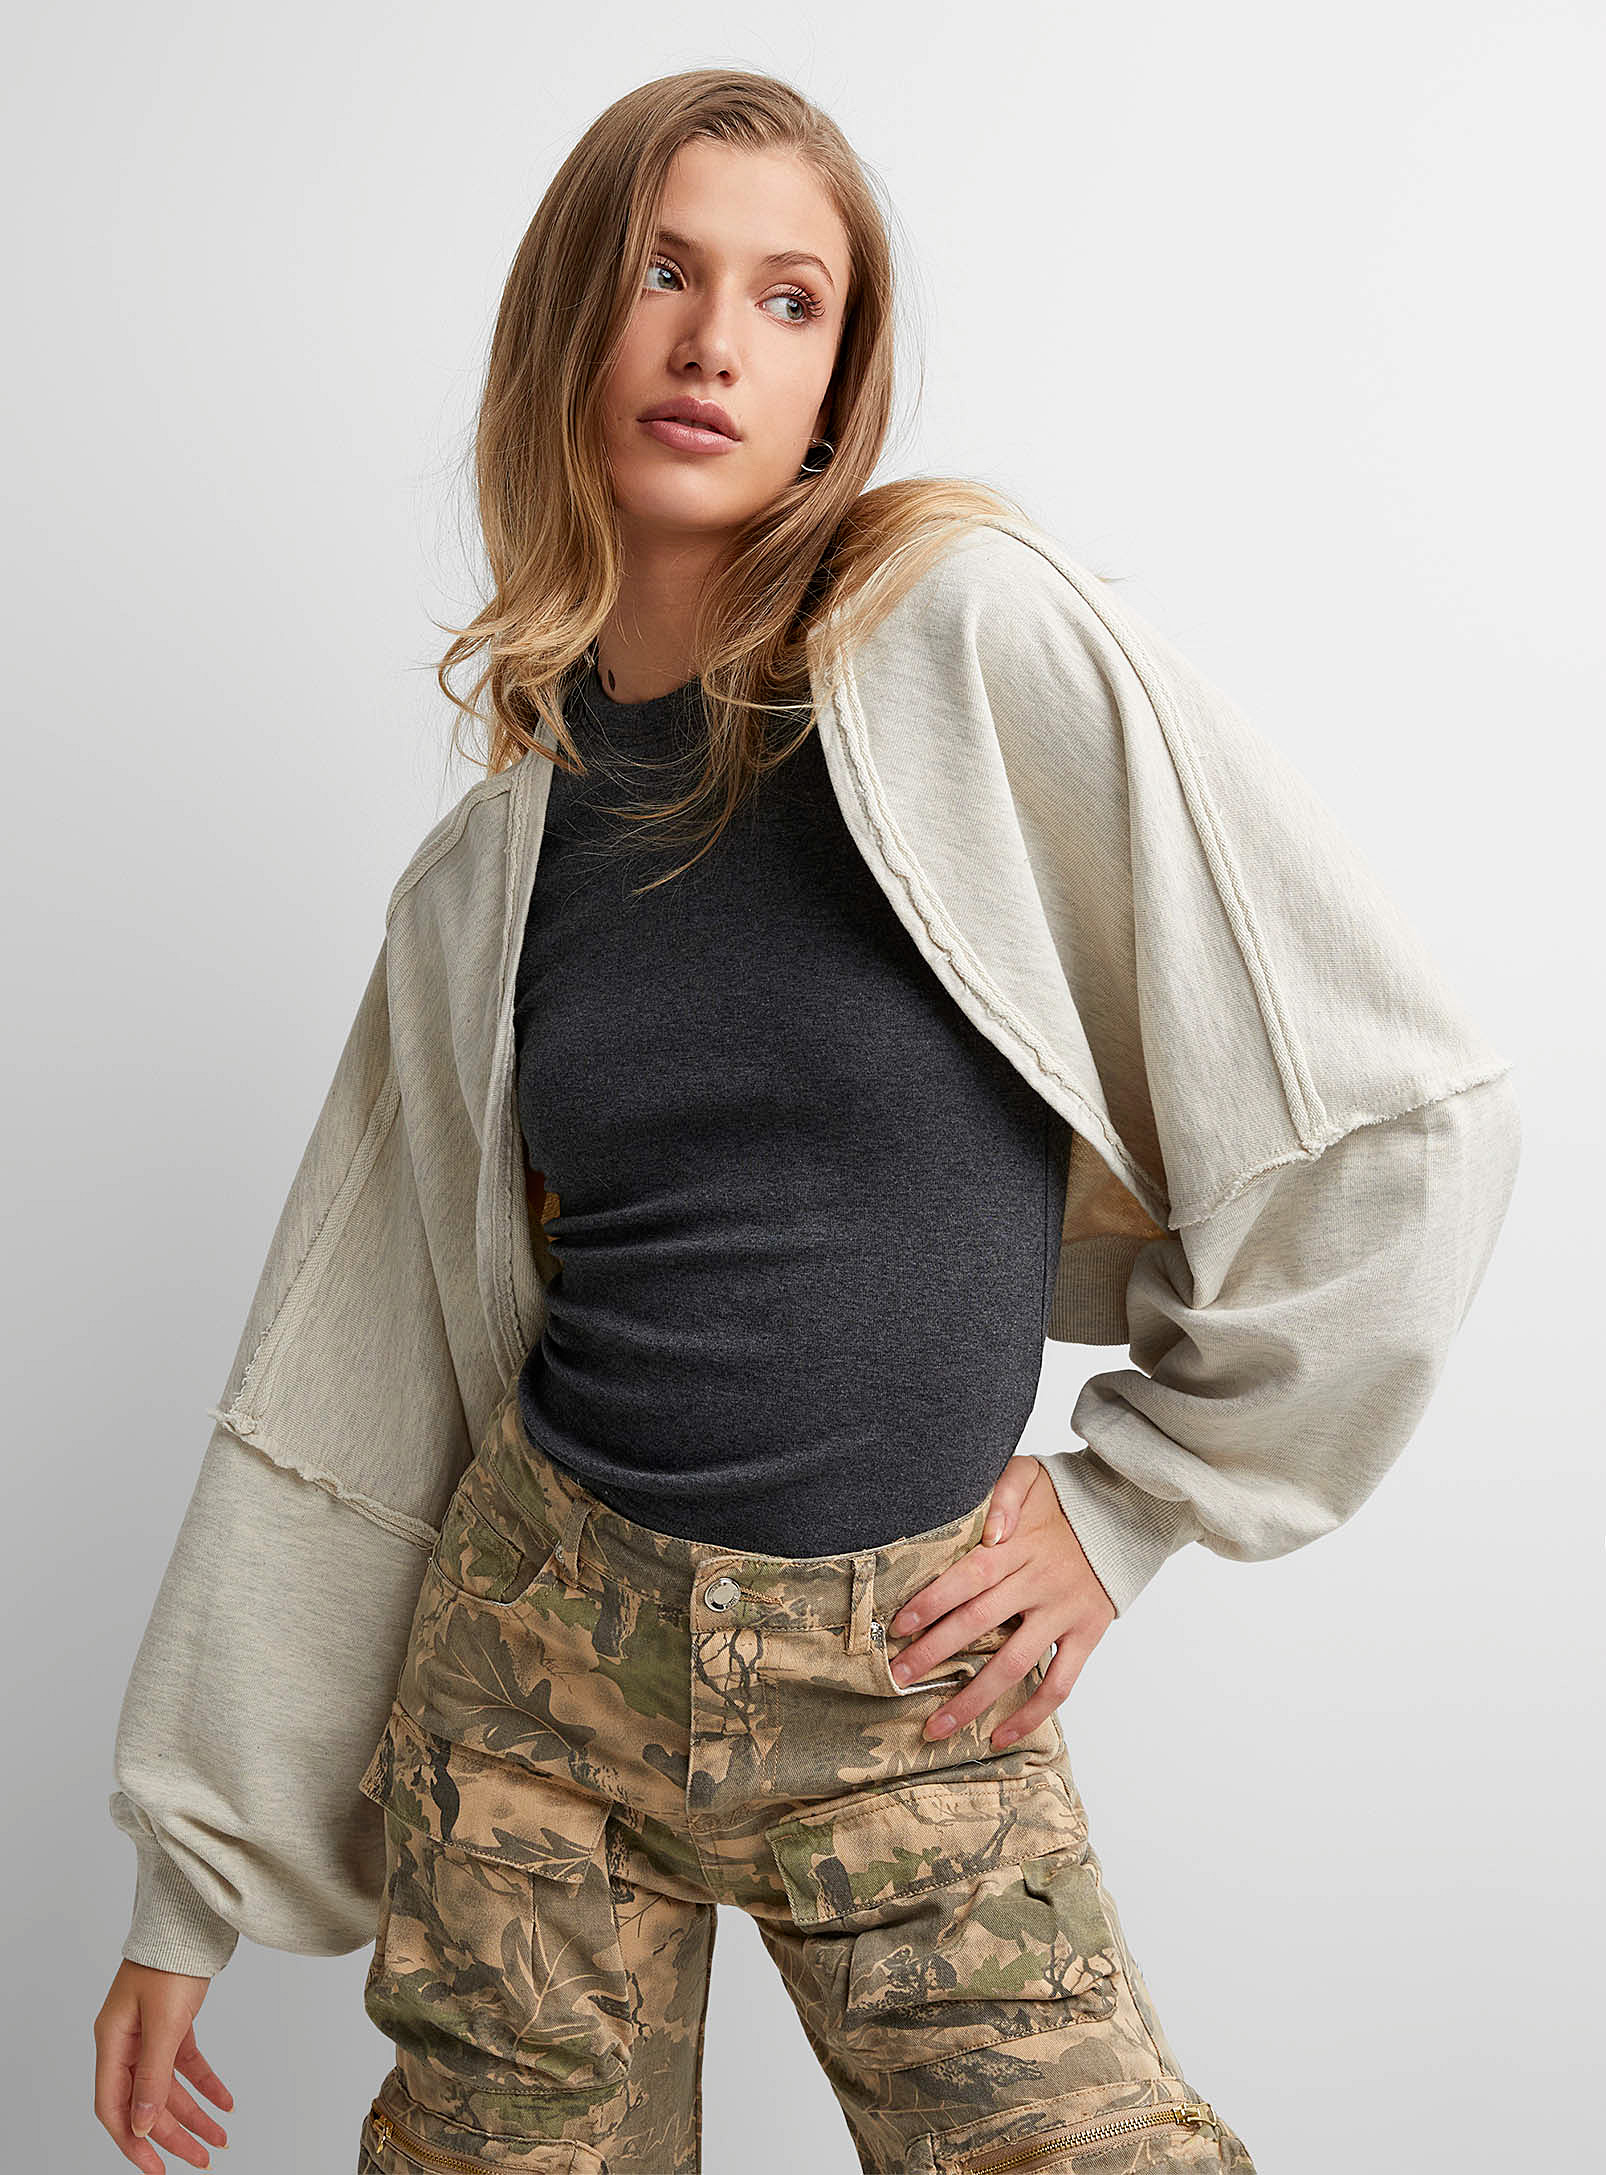 Free People - Le sweat ample ouvert Shrug it Off